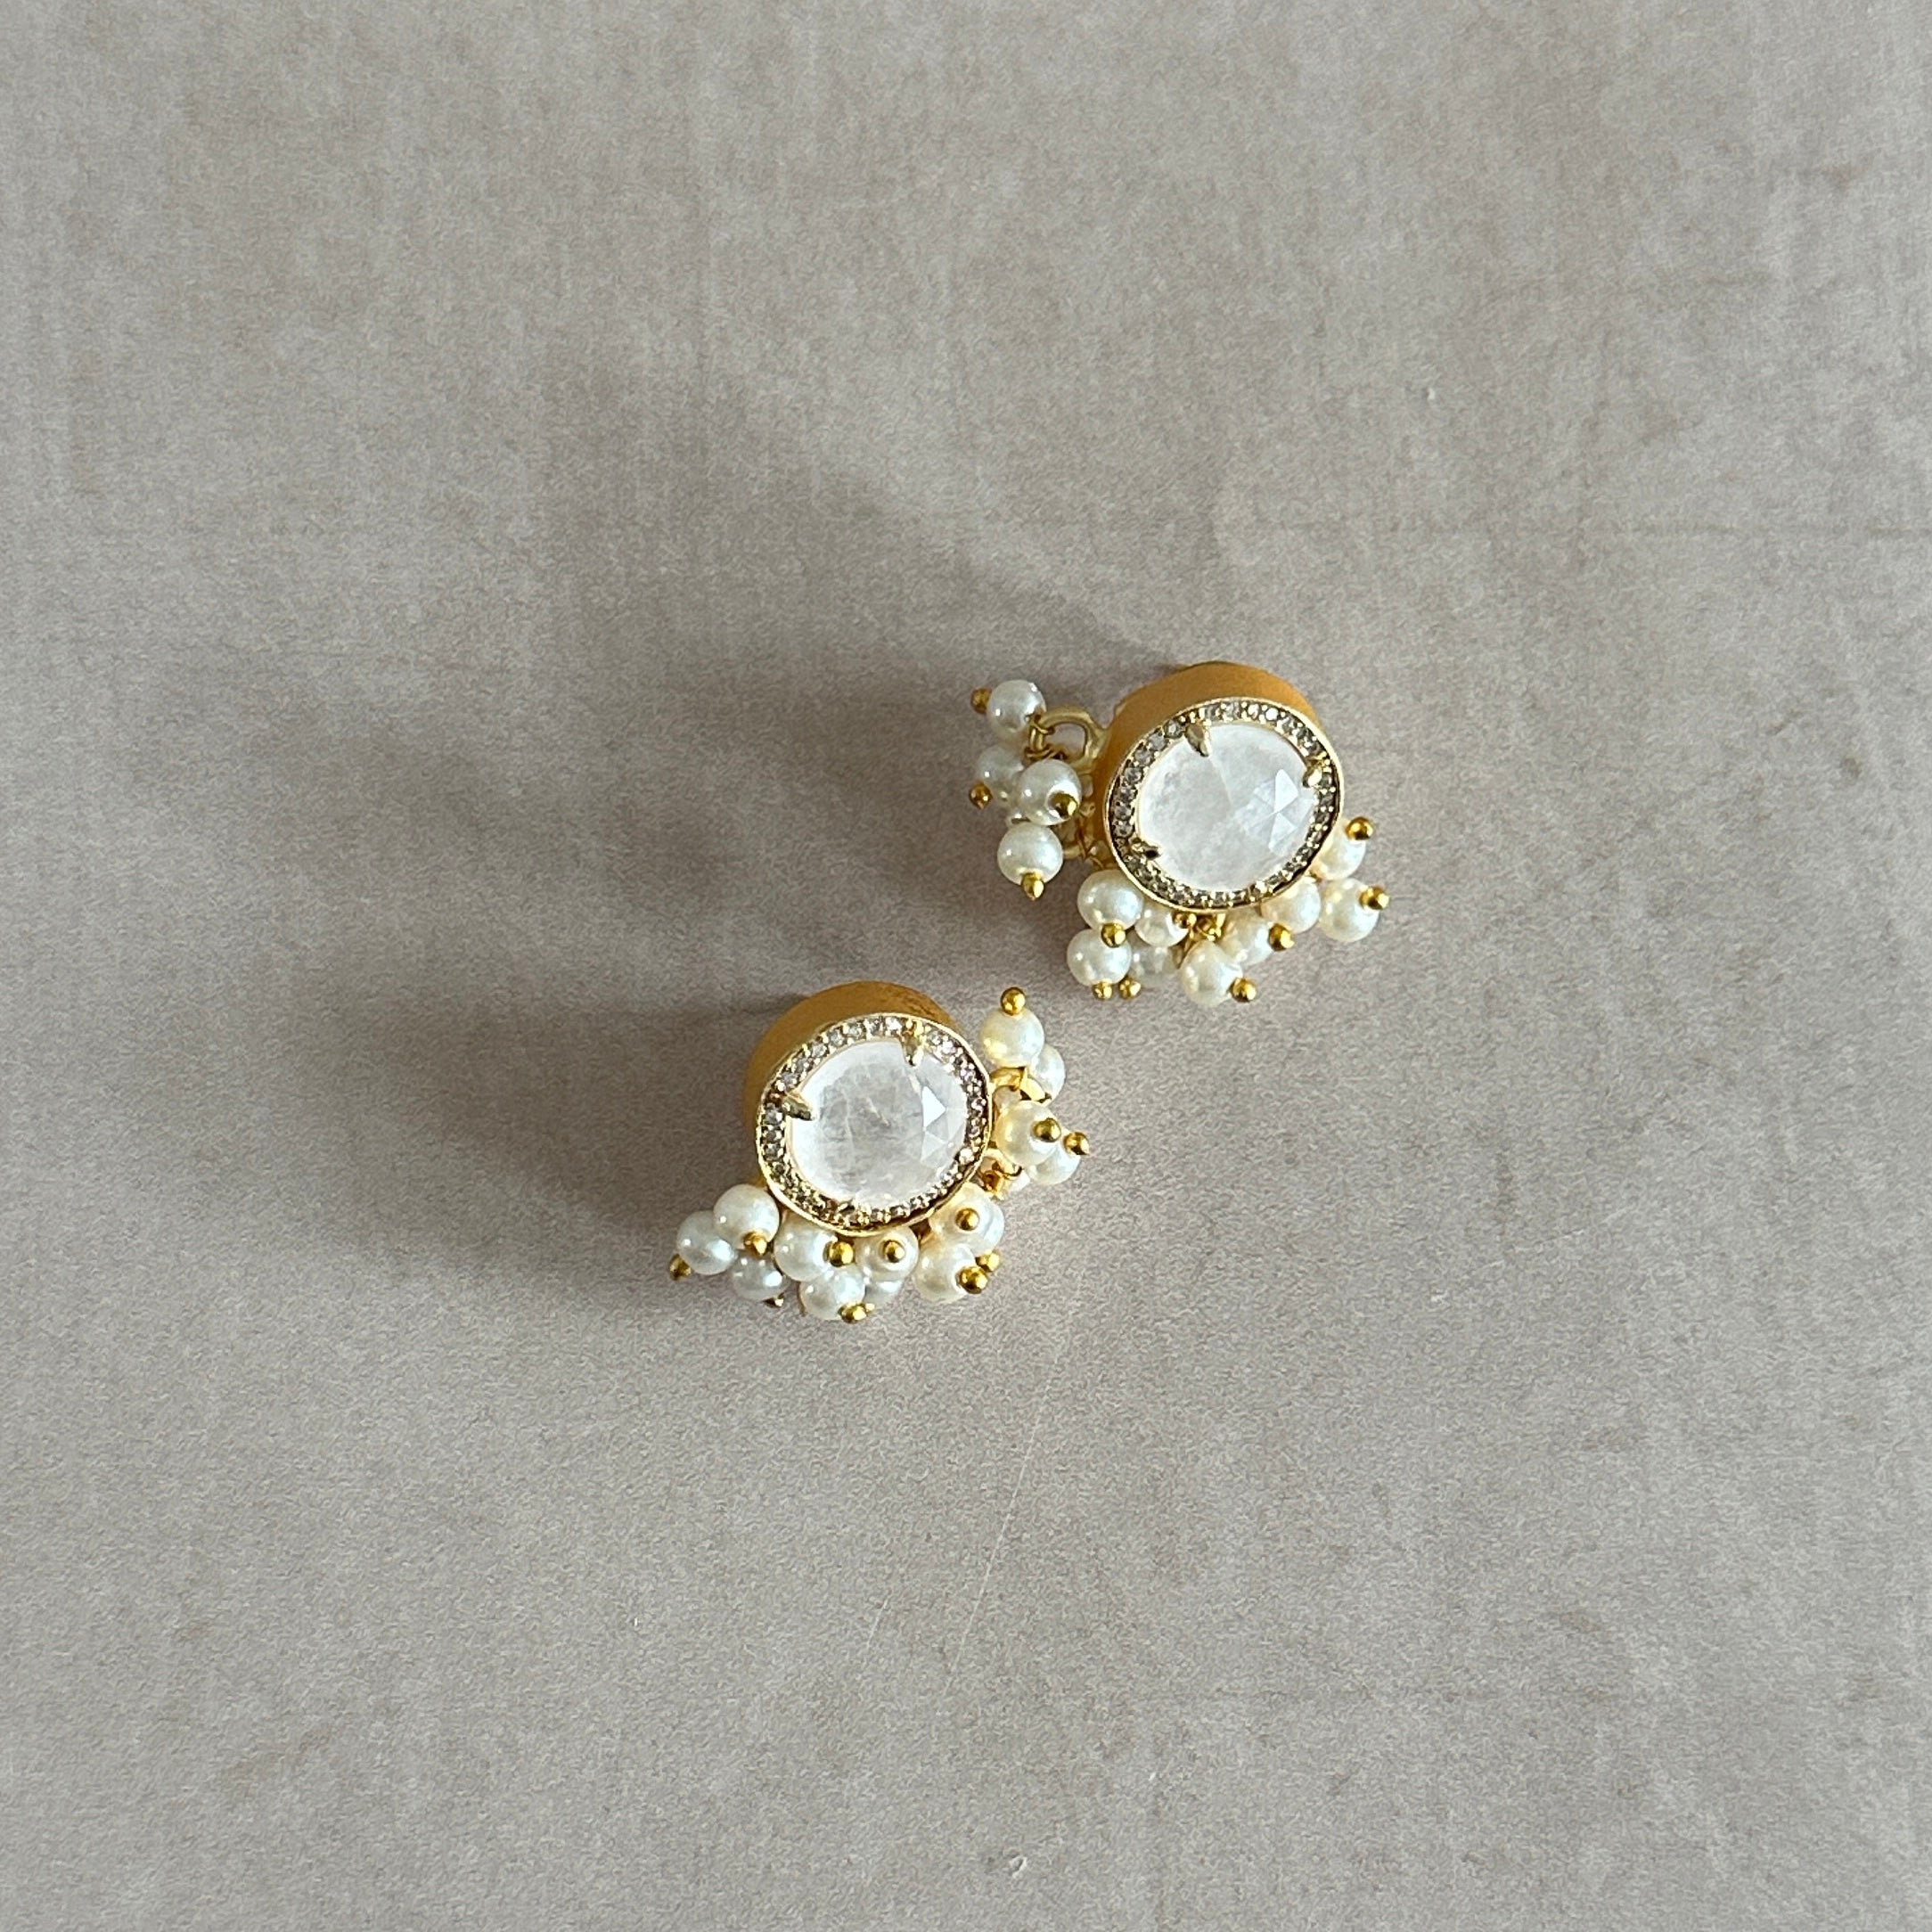 Add a touch of elegance to any outfit with our Indi White Stud Earrings. Crafted from white quartz crystal, these classic studs exude timeless beauty and charm. Make a statement without saying a word.